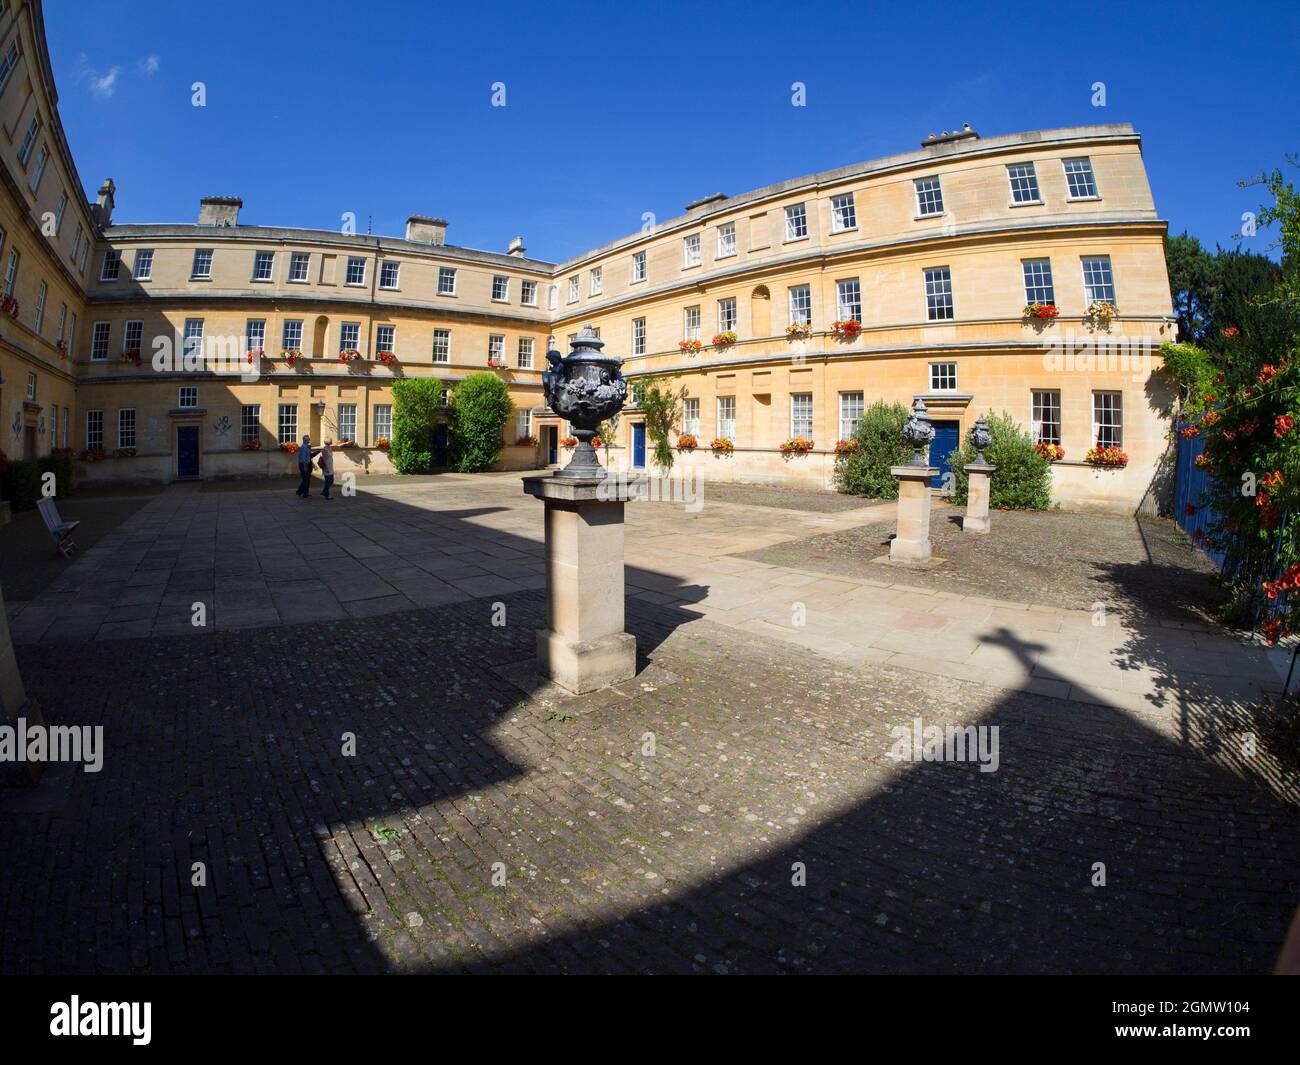 Oxford, England - 20 September 2013; two people in view. The garden Quadrangle of Trinity College of Oxford University, England.This relatively large Stock Photo